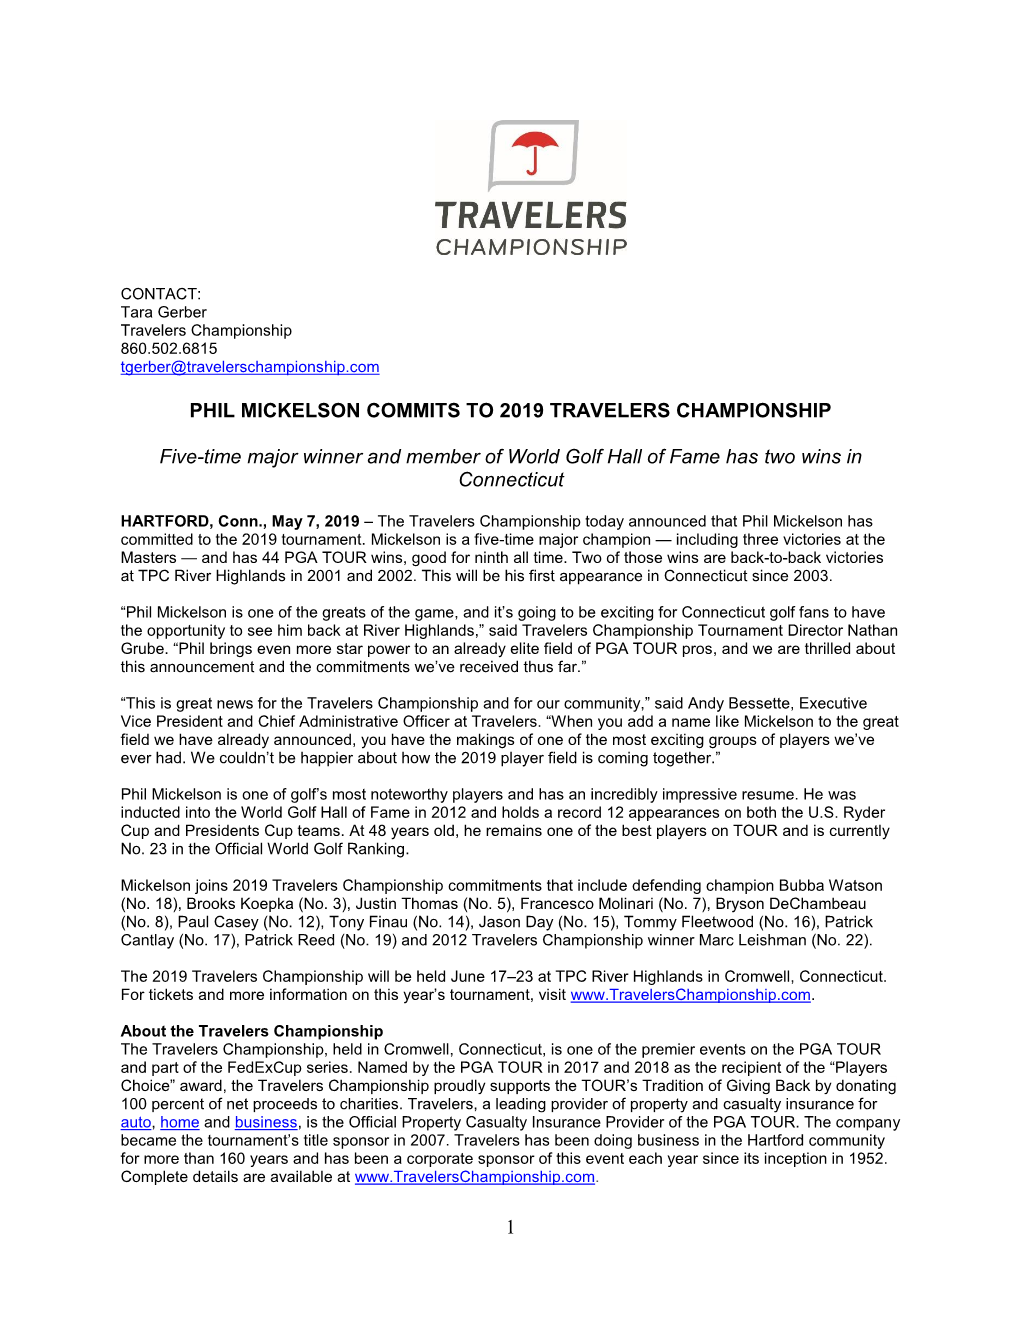 Phil Mickelson Commits to 2019 Travelers Championship